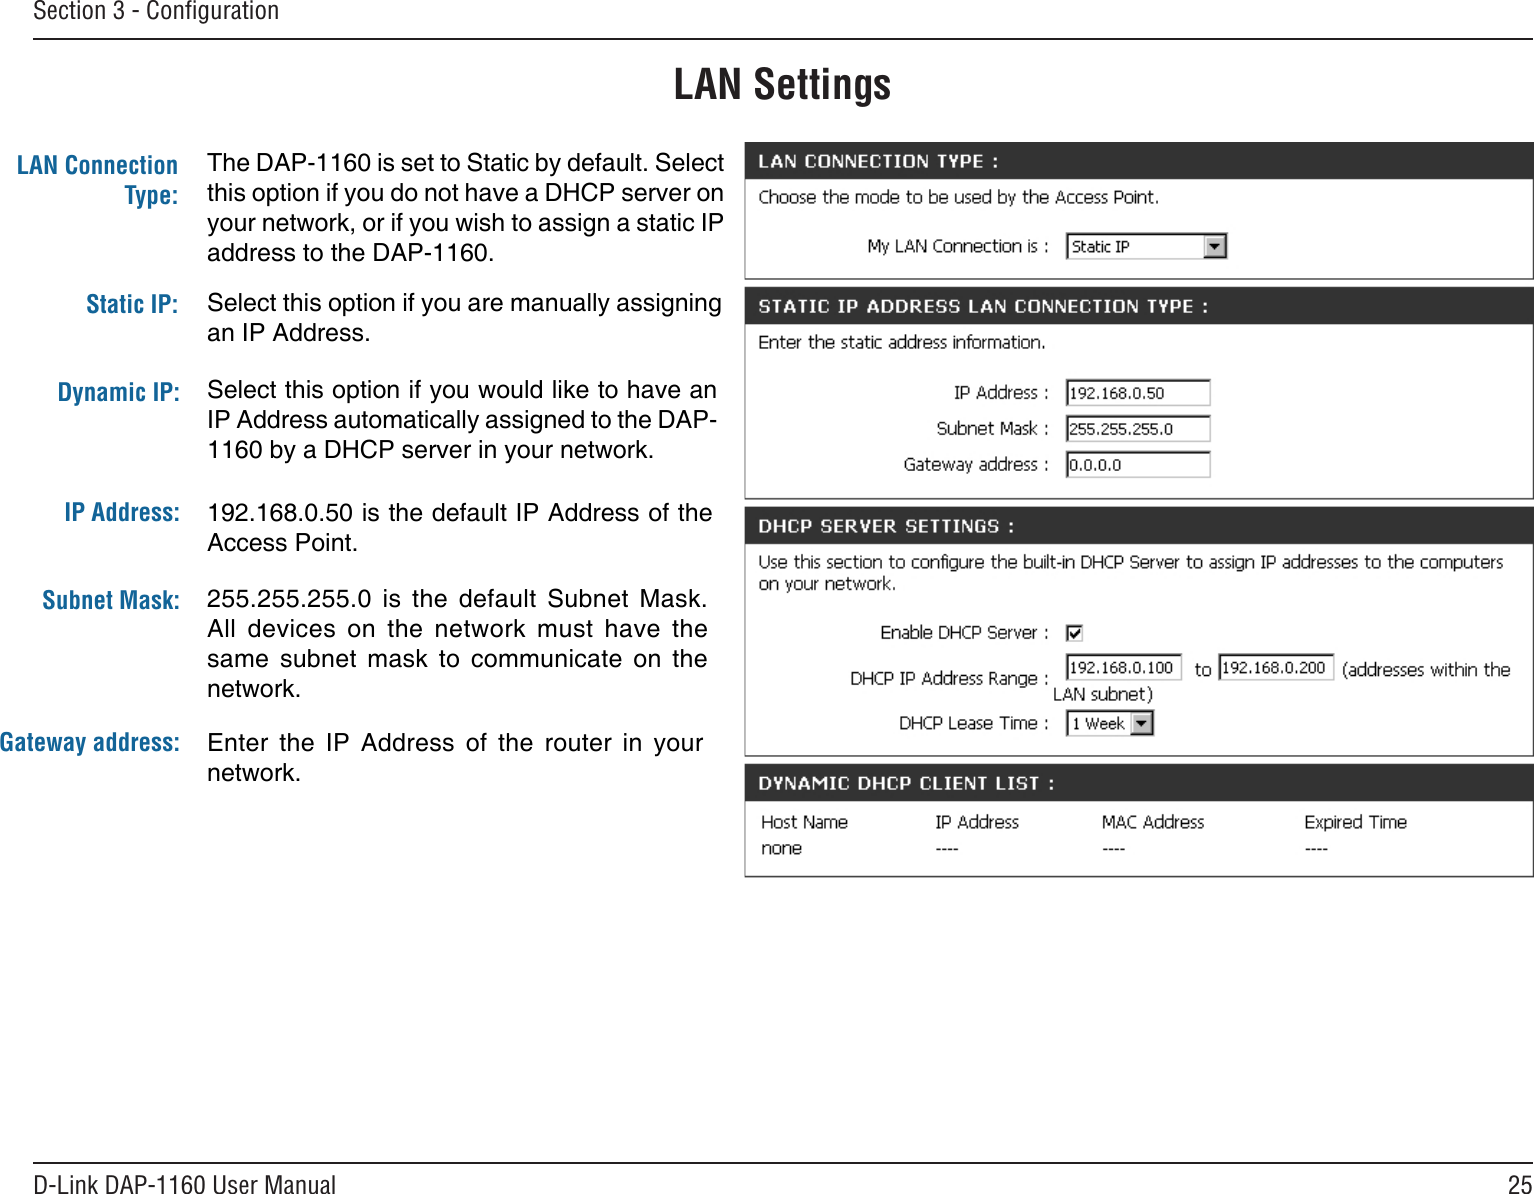 25D-Link DAP-1160 User ManualSection 3 - ConﬁgurationThe DAP-1160 is set to Static by default. Select this option if you do not have a DHCP server on your network, or if you wish to assign a static IP address to the DAP-1160.Select this option if you are manually assigning an IP Address.LAN Settings192.168.0.50 is the default IP Address of the Access Point.LAN Connection Type:Static IP:Dynamic IP:IP Address:Select this option if you would like to have an IP Address automatically assigned to the DAP-1160 by a DHCP server in your network.Subnet Mask:Gateway address:255.255.255.0  is  the  default  Subnet  Mask. All  devices  on  the  network  must  have  the same  subnet  mask  to  communicate  on  the network.Enter  the  IP  Address  of  the  router  in  your network.